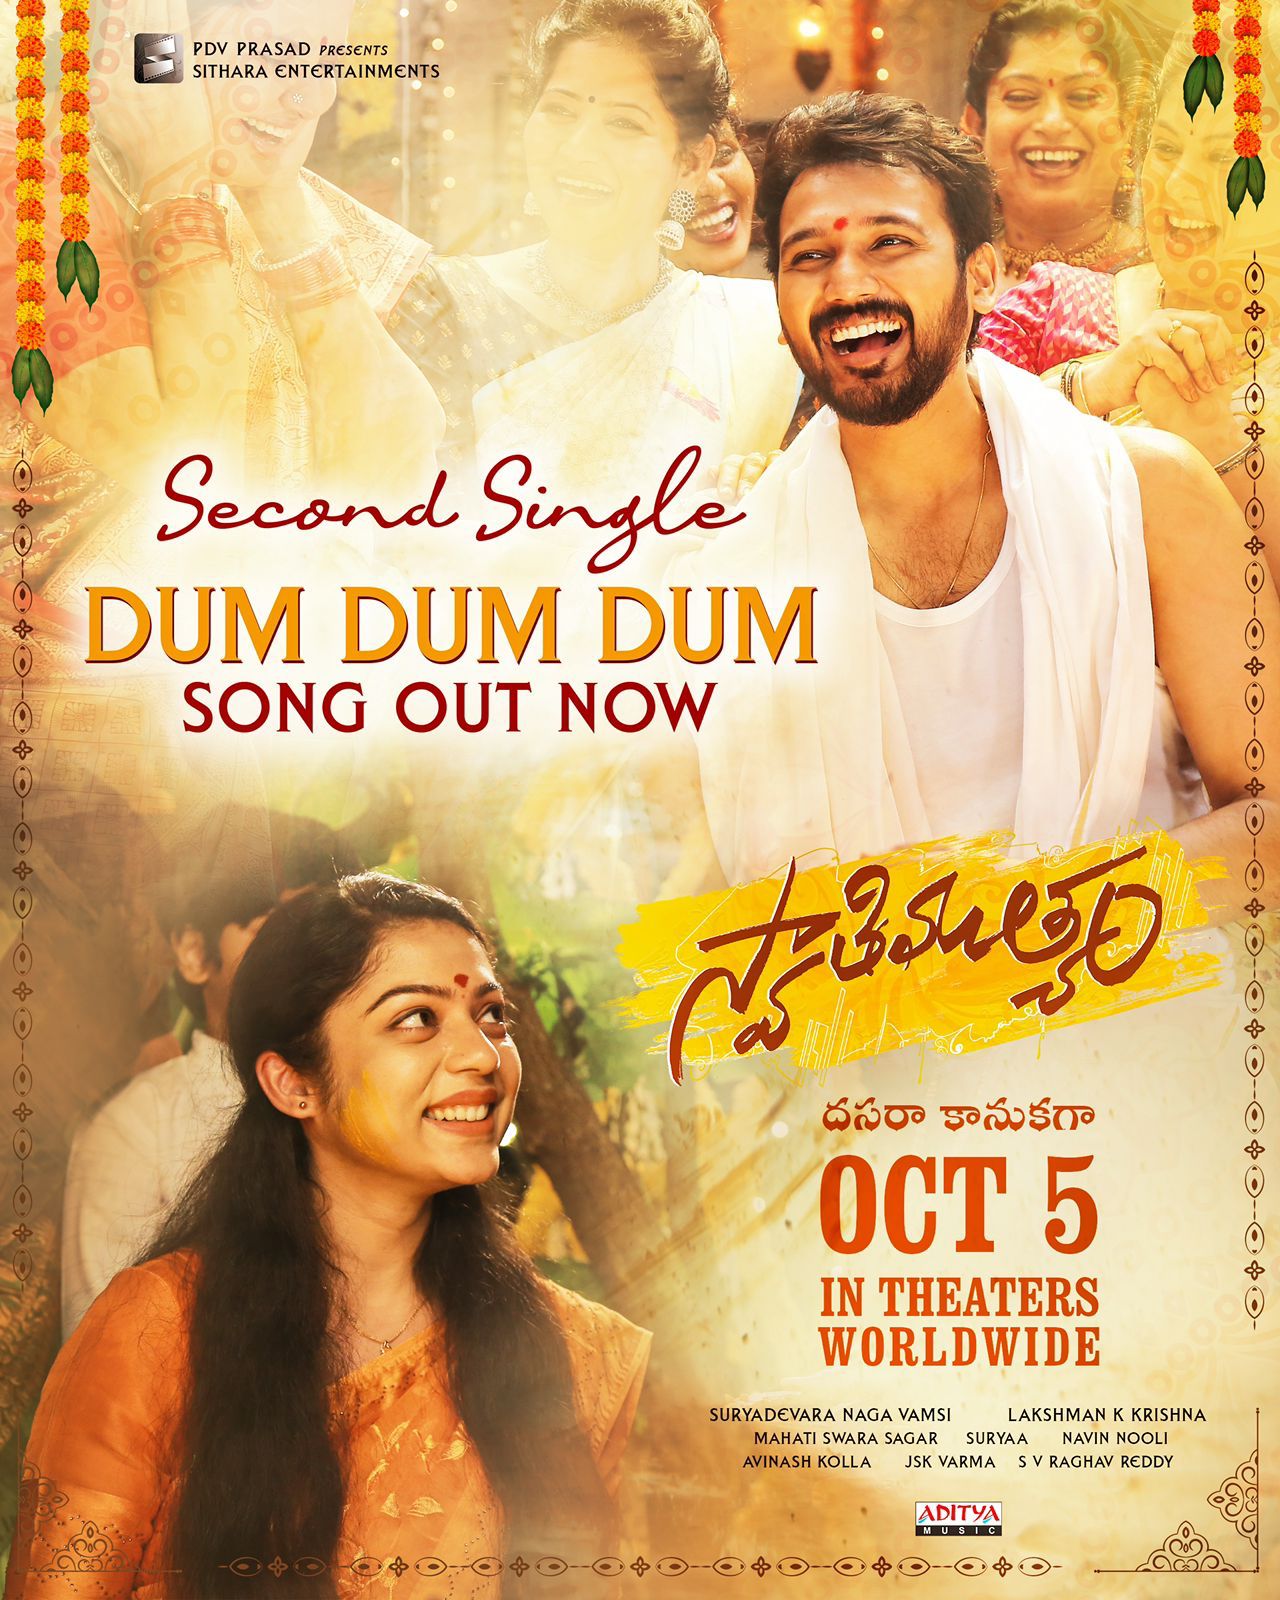   Dum Dum Dum song from Swathimuthyam movie out